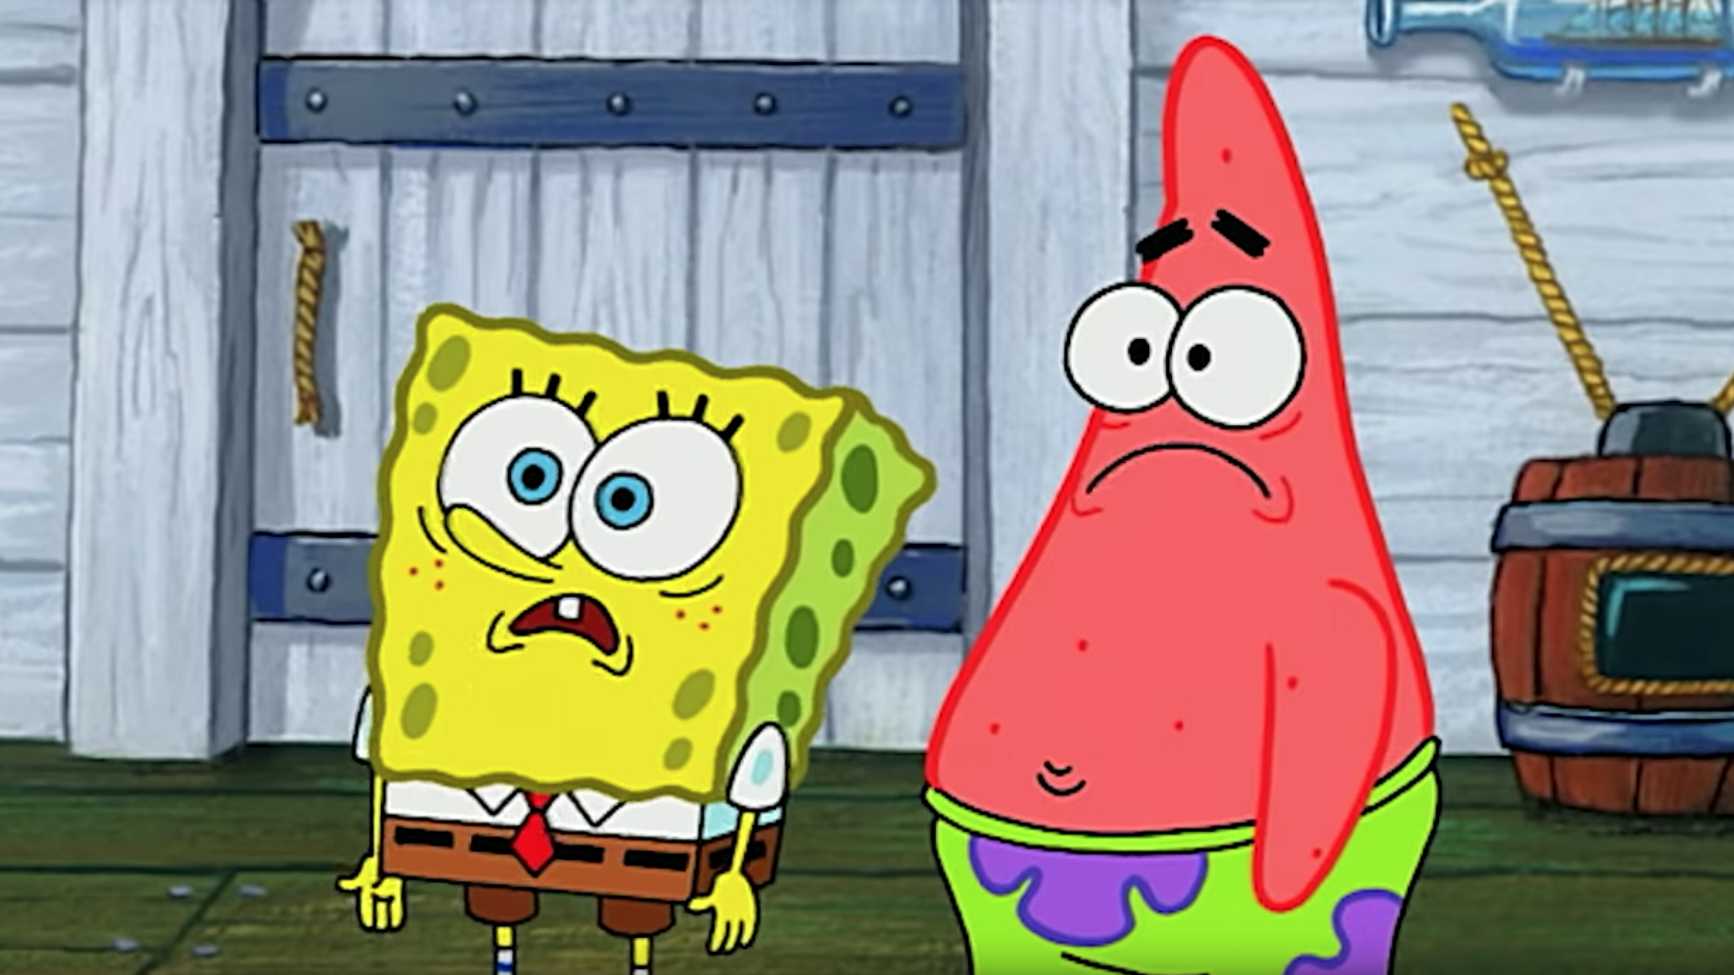 squidward and patrick gif